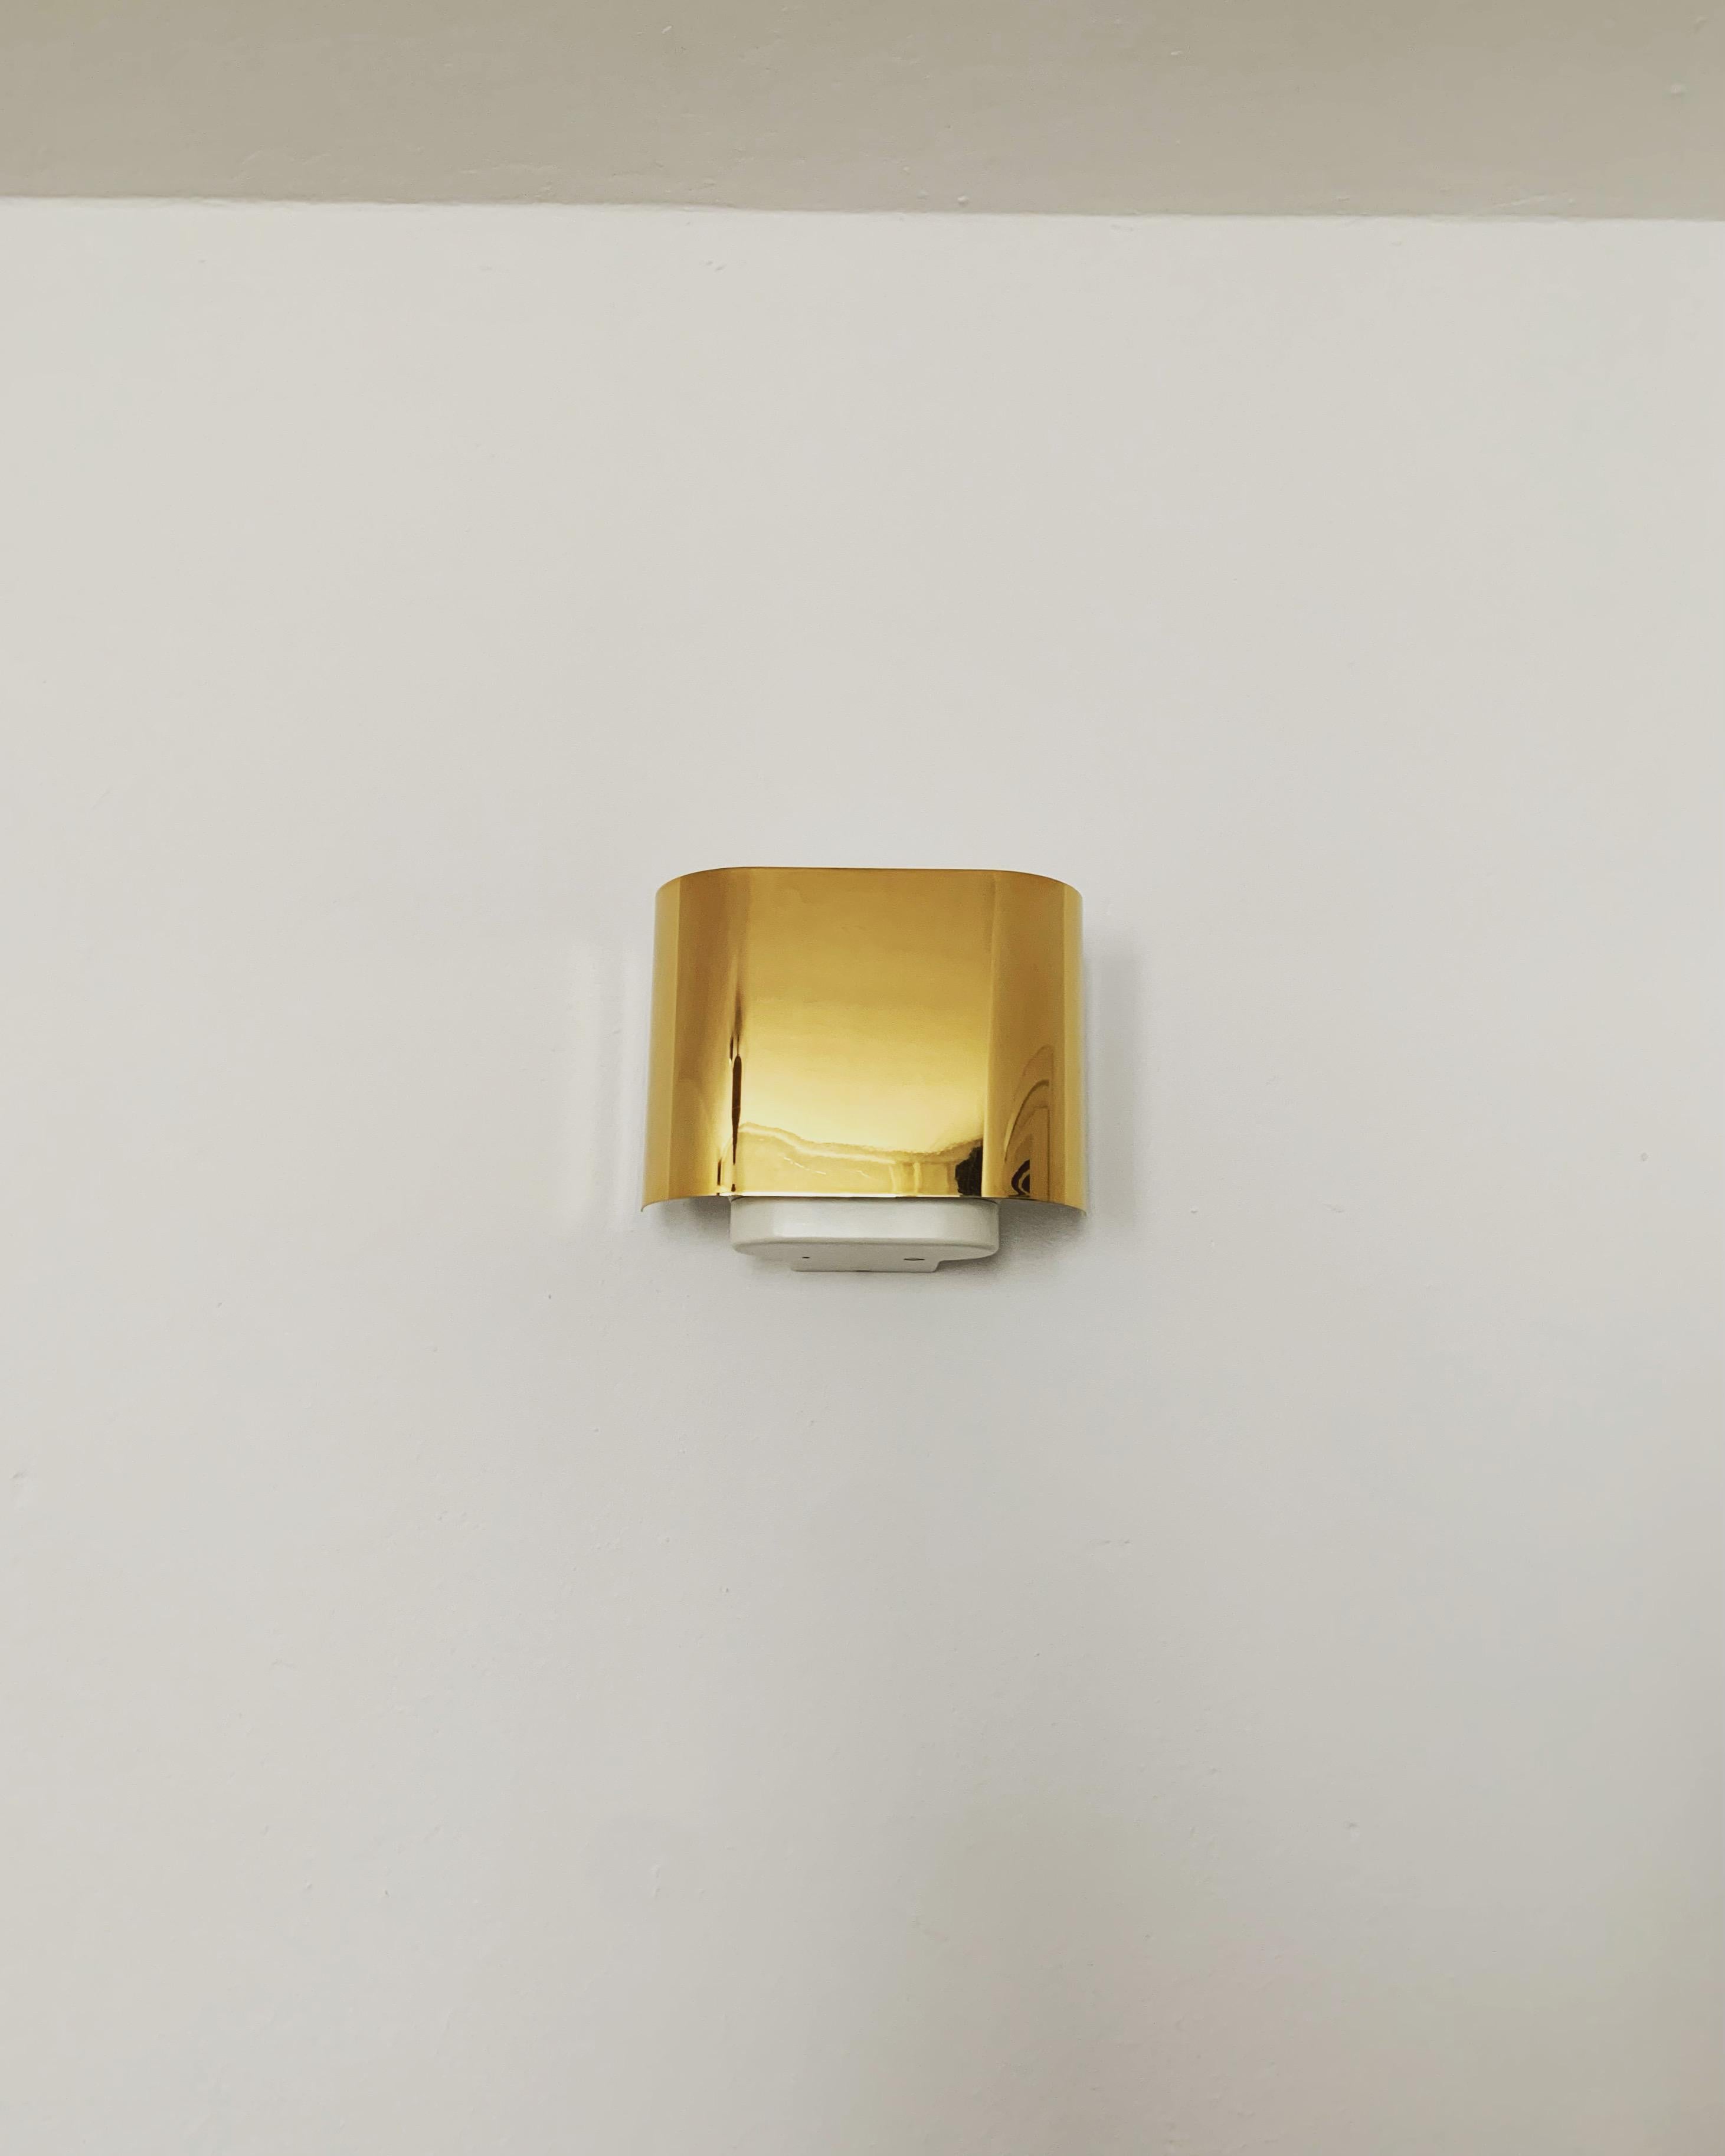 Very nice pair of gold sconces from the 1960s.
Elegantly reduced design.
A spectacular play of light is created.

Manufacturer: Staff

A lamp has an integrated switch.

Condition:

Very good vintage condition with slight signs of wear